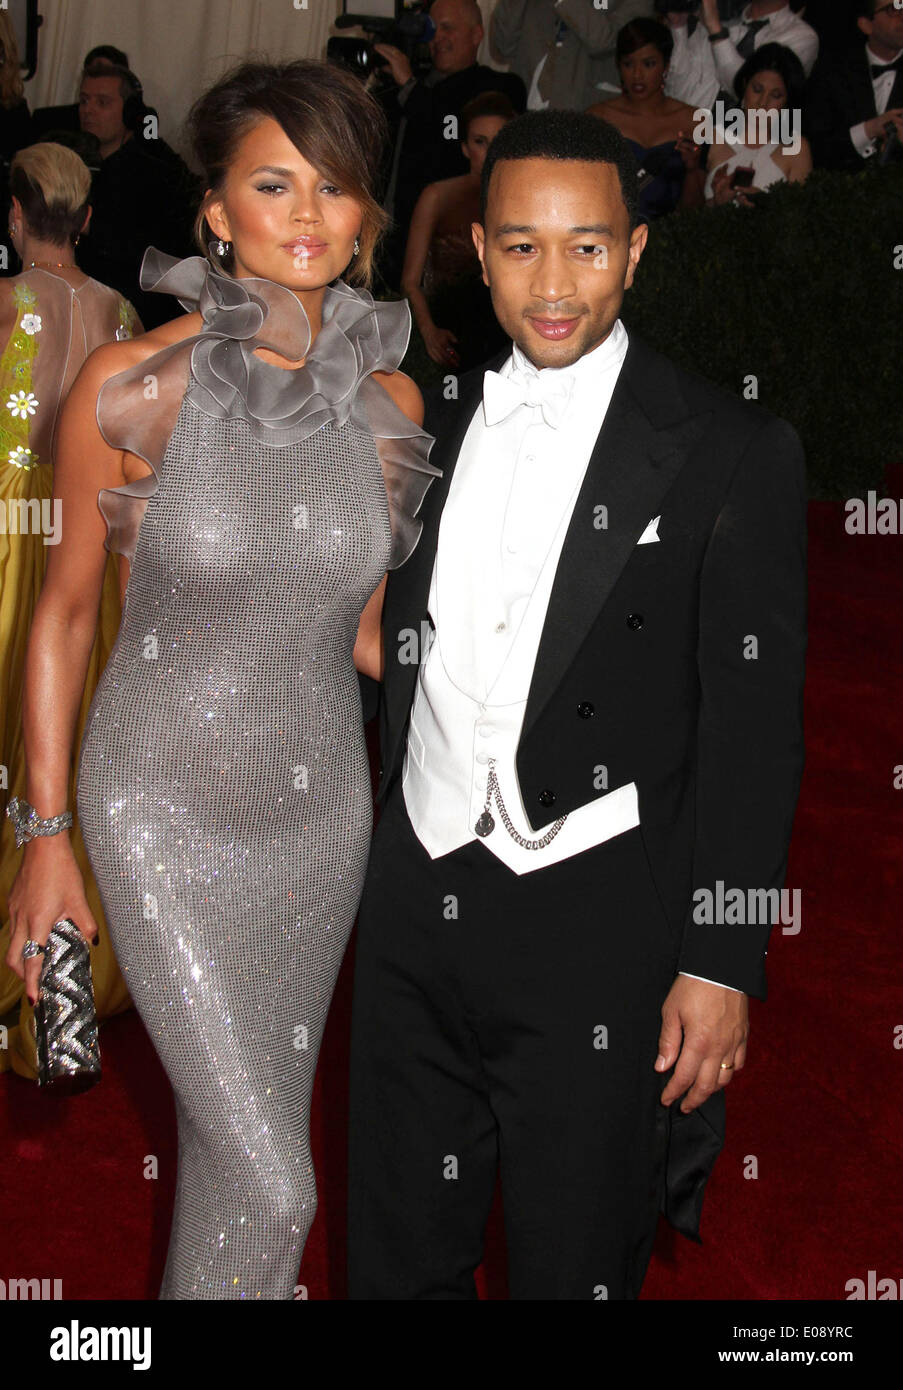 May 5, 2014 - New York, New York, U.S. - Singer JOHN LEGEND and model CHRISSY TEIGEN attend the 2014 Costume Institute Benefit Gala opening of  'Charles James: Beyond Fashion and the new Anna Wintour Costume Center' held at the Metropolitan Museum of Art. (Credit Image: © Nancy Kaszerman/ZUMAPRESS.com) Stock Photo